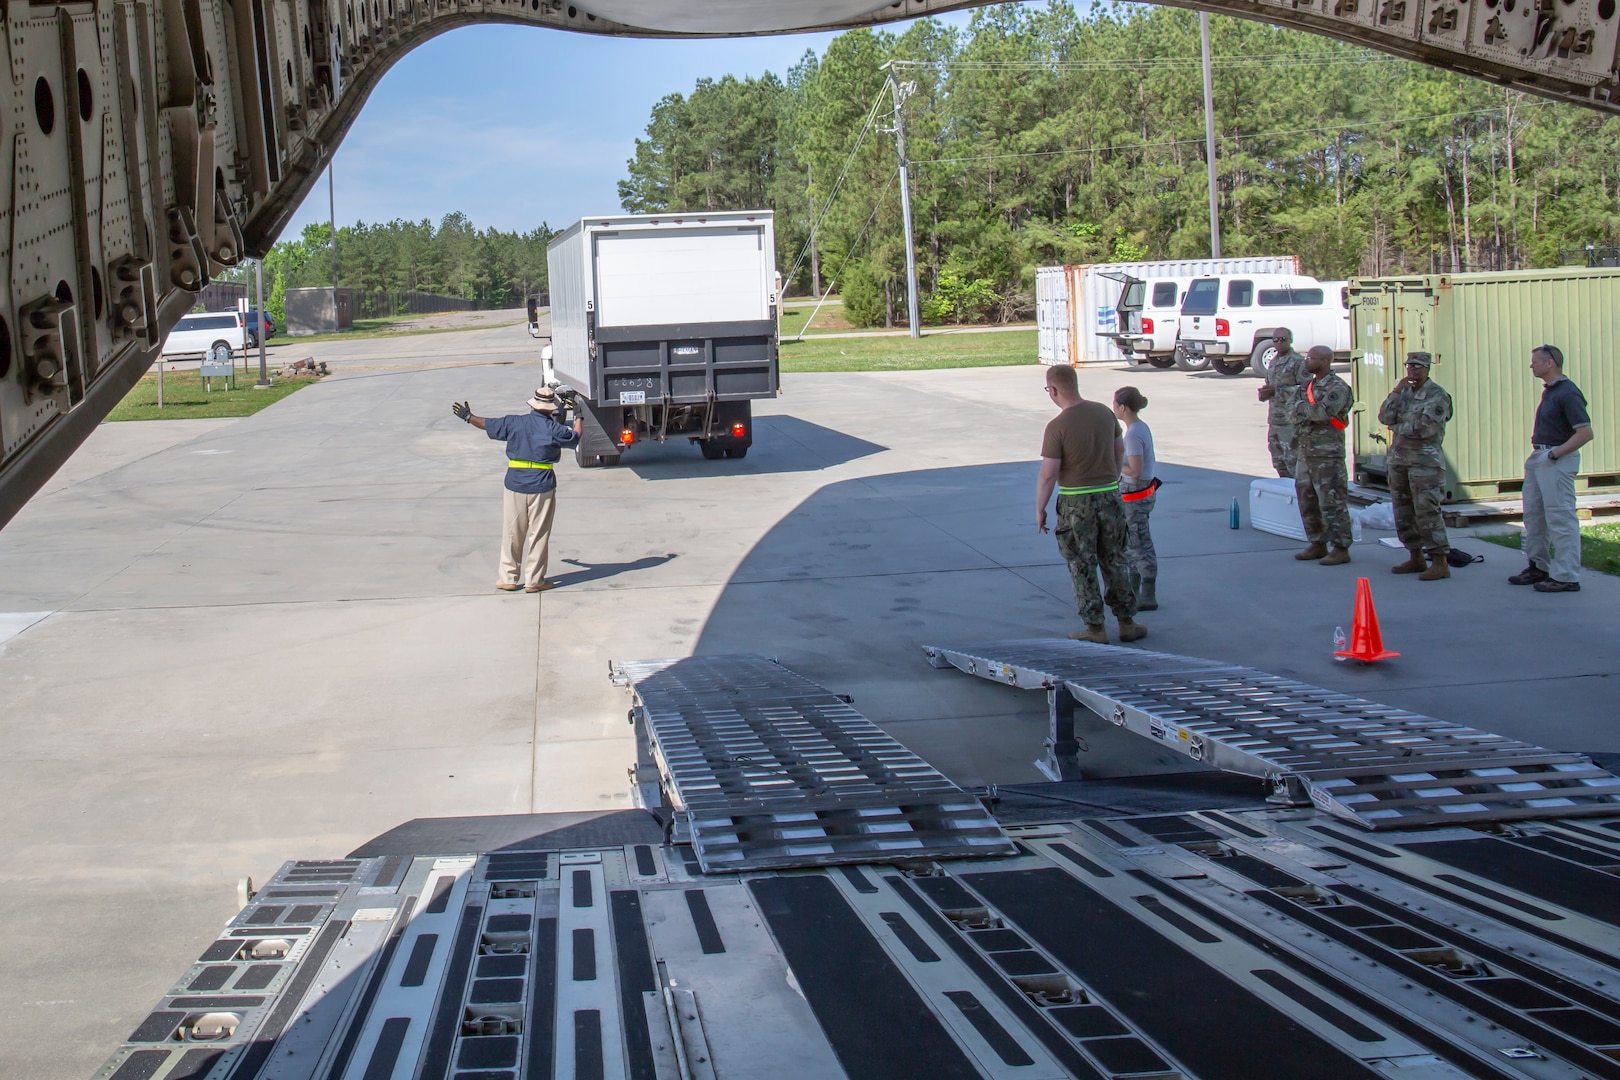 Members of Joint Task Force Civil Support (JTF-CS) participate in a two-day training exercise loading and unloading vehicles on a modified Boeing C-17 Globemaster III. The exercise helped members build the confidence and skills necessary to safely and successfully deploy. JTF-CS provides command and control for designated Department of Defense specialized response forces to assist local, state, federal and tribal partners in saving lives, preventing further injury, and providing critical support to enable community recovery. (Official Department of Defense photo by Mass Communication Specialist 3rd Class Michael Redd/released)